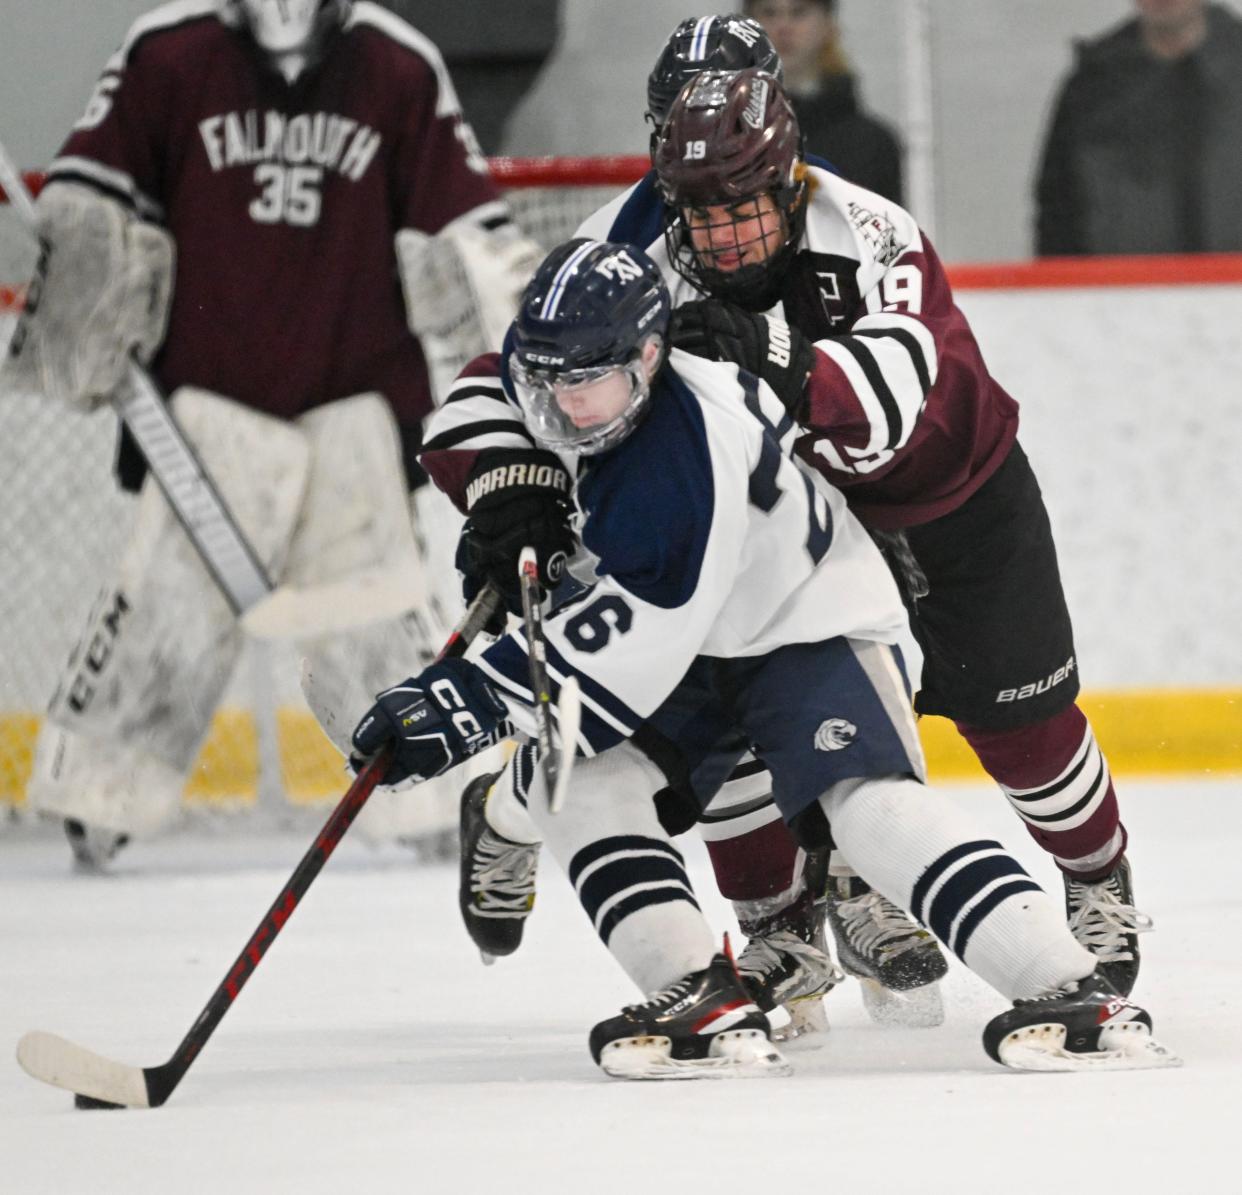 Charlie Bardelis of Falmouth pressures John Milne of Plymouth North. Falmouth lost 2-1 and ended its playoff run.